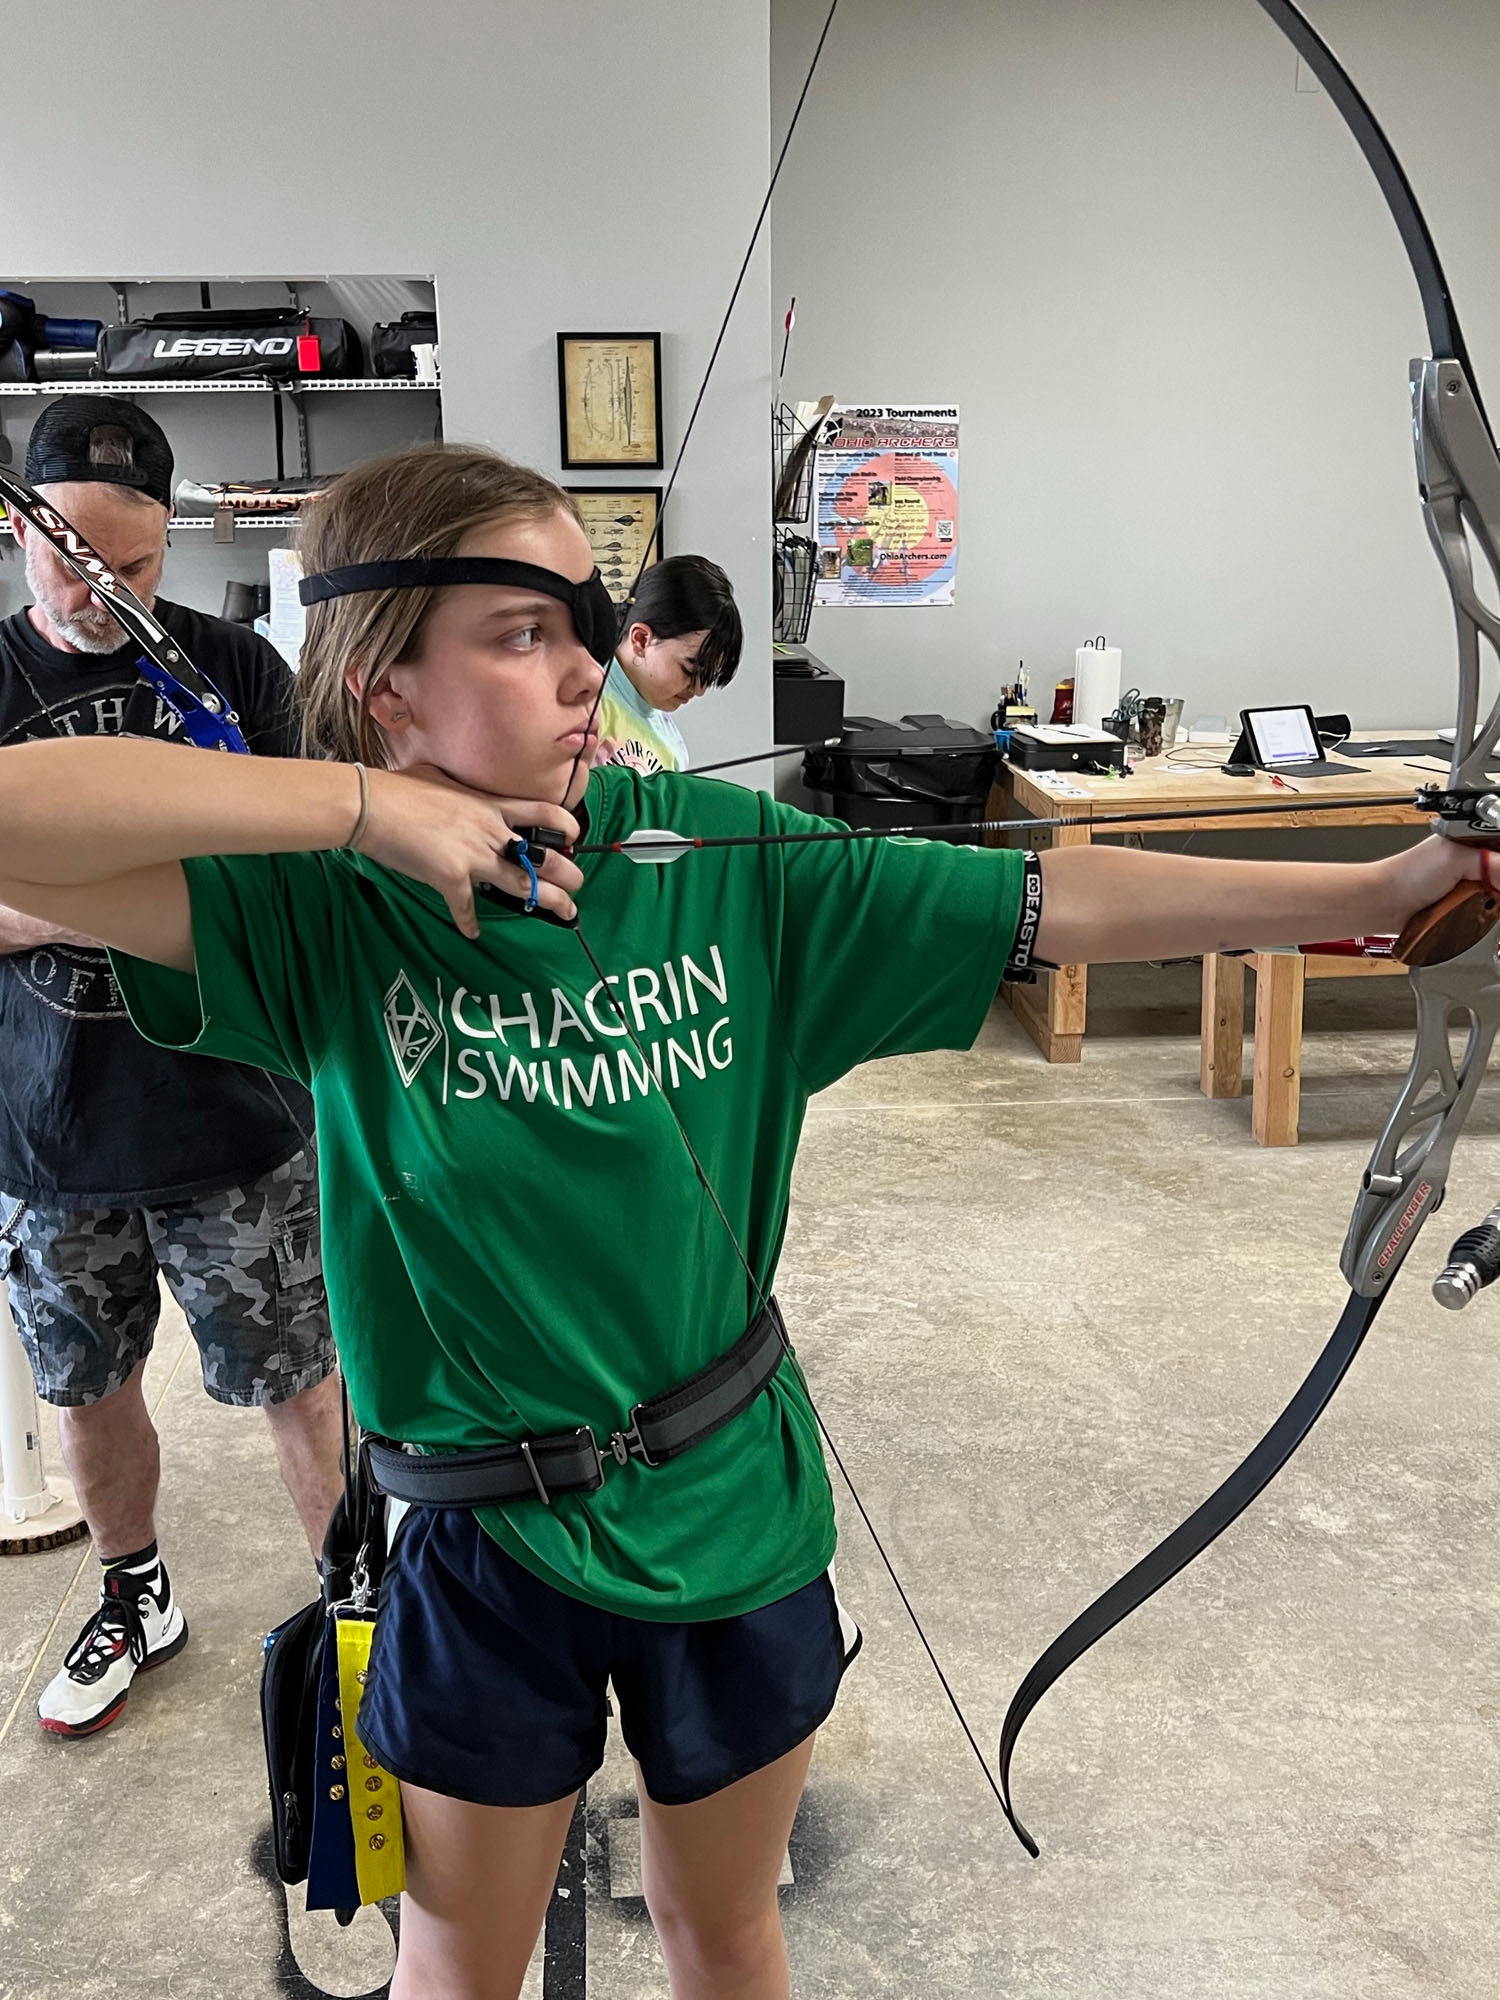 archery lessons to take you from beginner to advance shooter